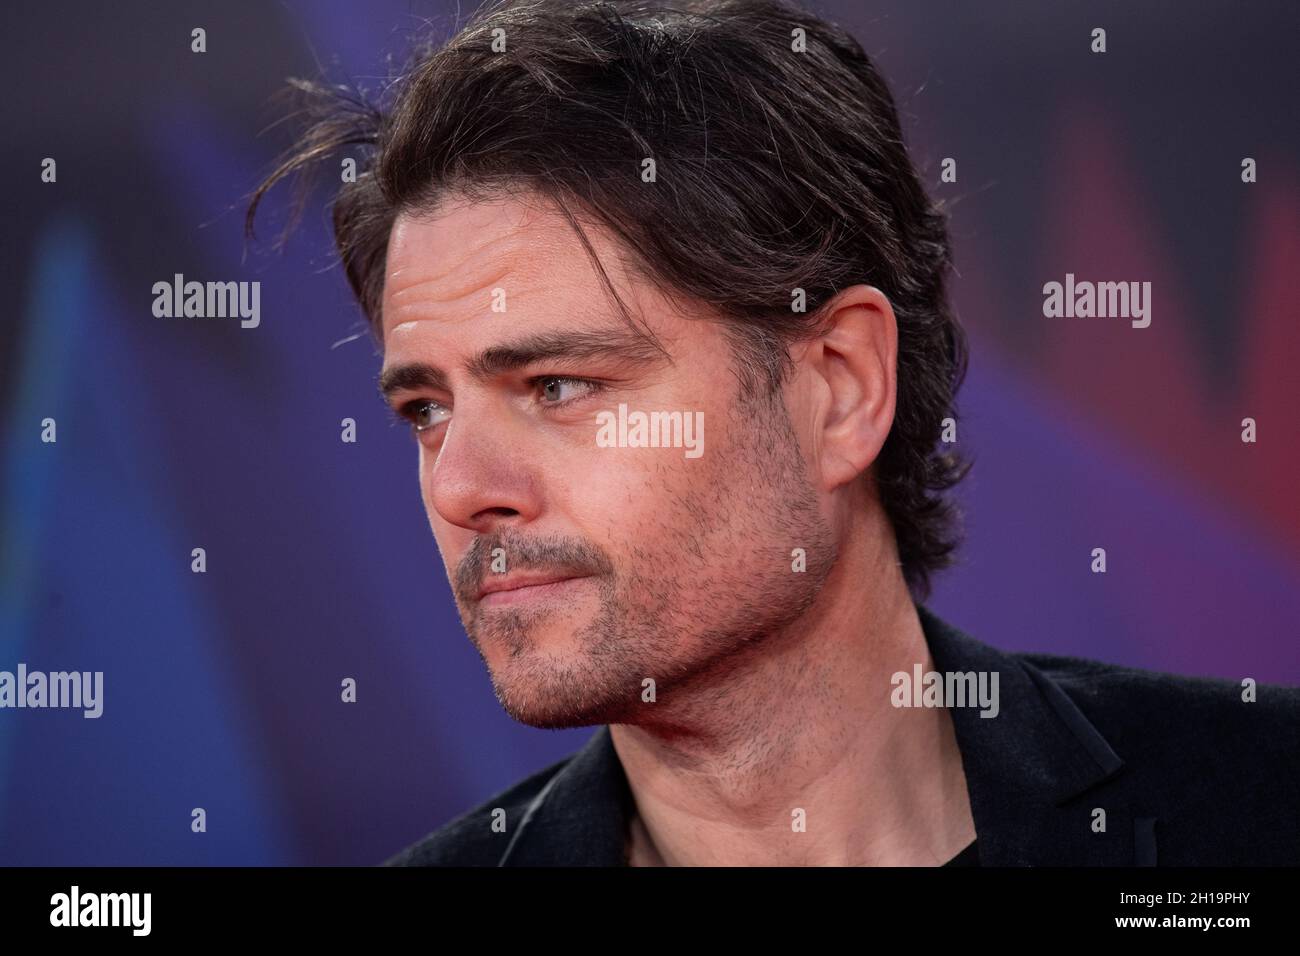 London, UK. 17 October 2021. Richard Short arriving for the premiere of The Tragedy of Macbeth, at the Royal Festival Hall in London during the BFI London Film Festival. Picture date: Sunday October 17, 2021. Photo credit should read: Matt Crossick/Empics/Alamy Live News Stock Photo